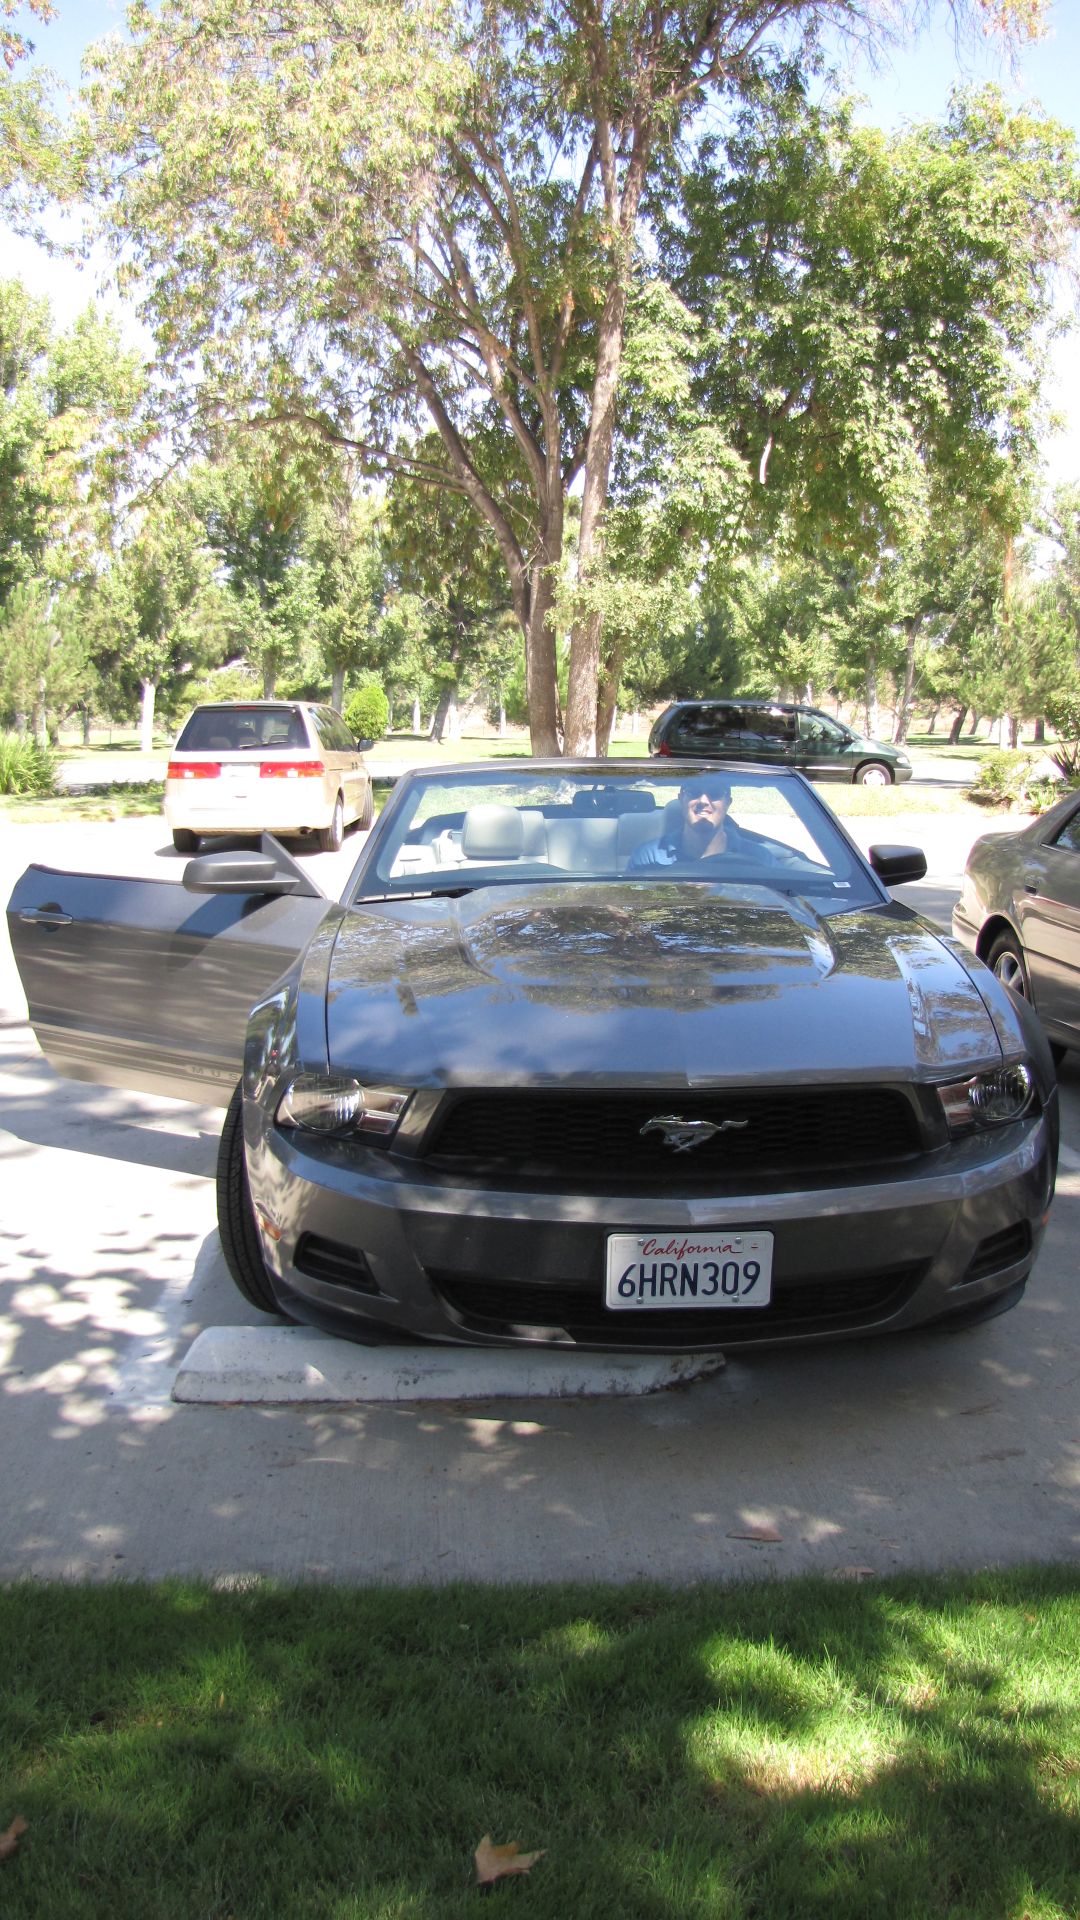 Westlake Village, LA, CA, USA - David, getting this as a hire car was awesome mate!